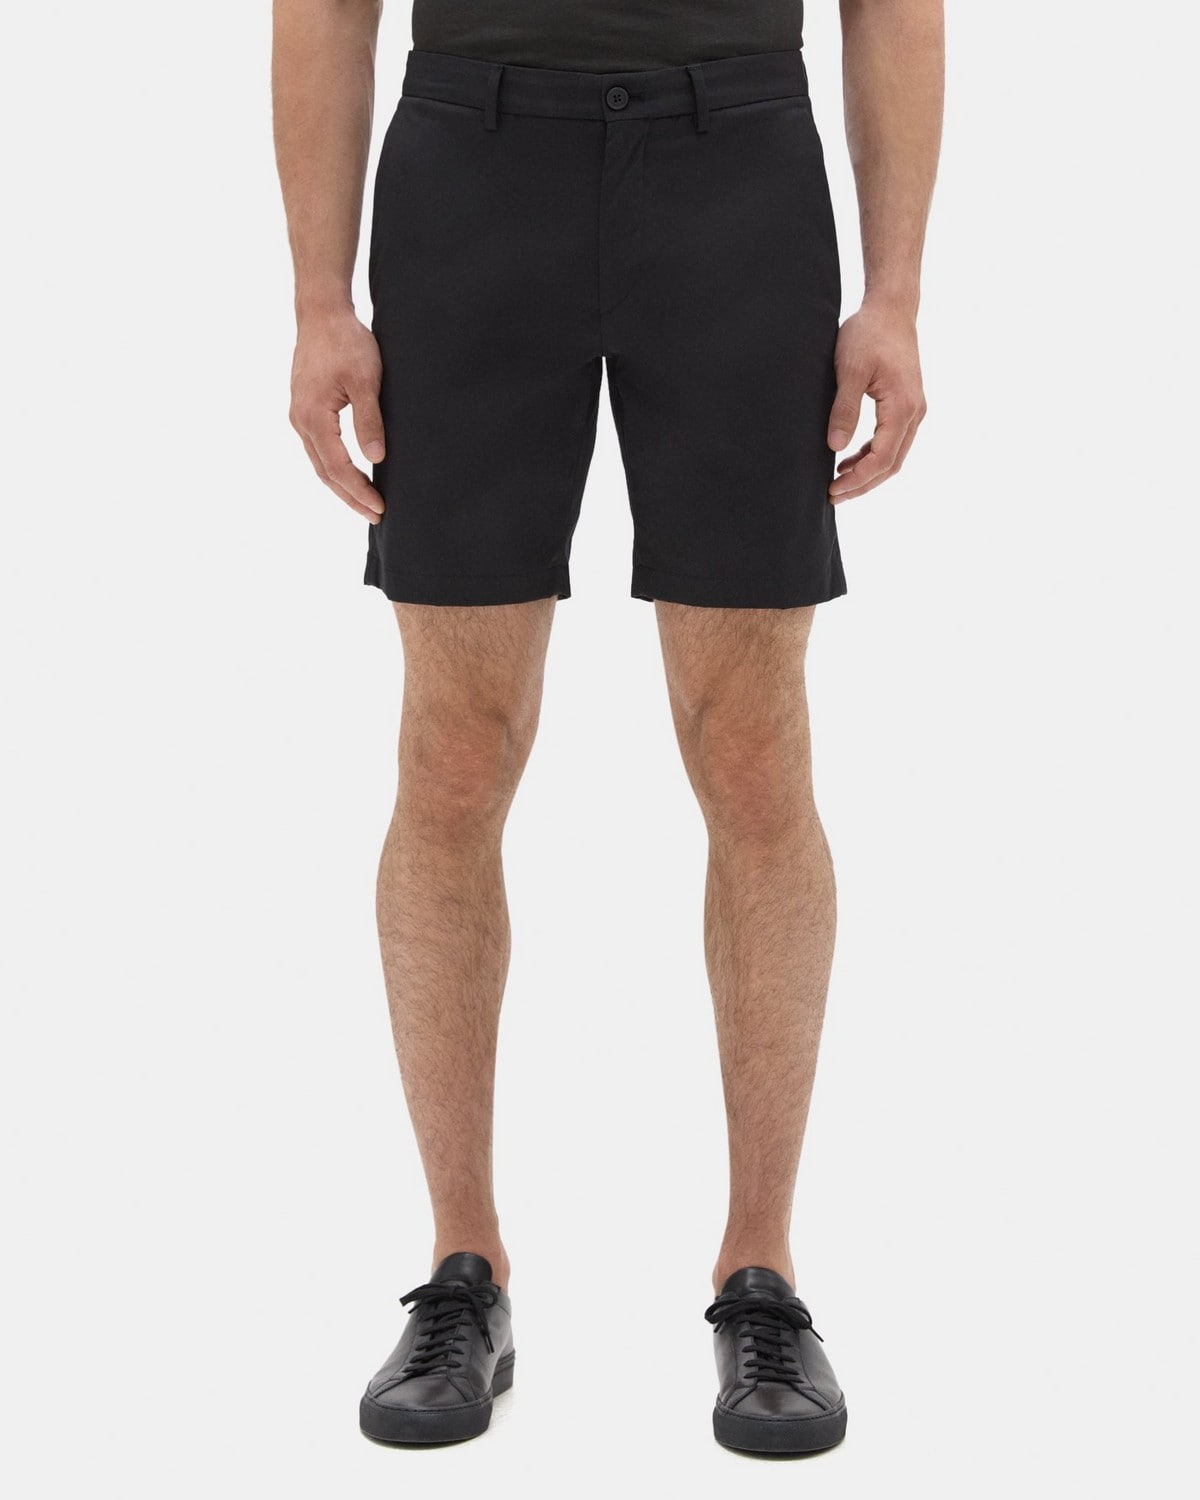 34 38 NWT Theory Men's Zaine Ascend Tech Flat Front Shorts Navy Size 30